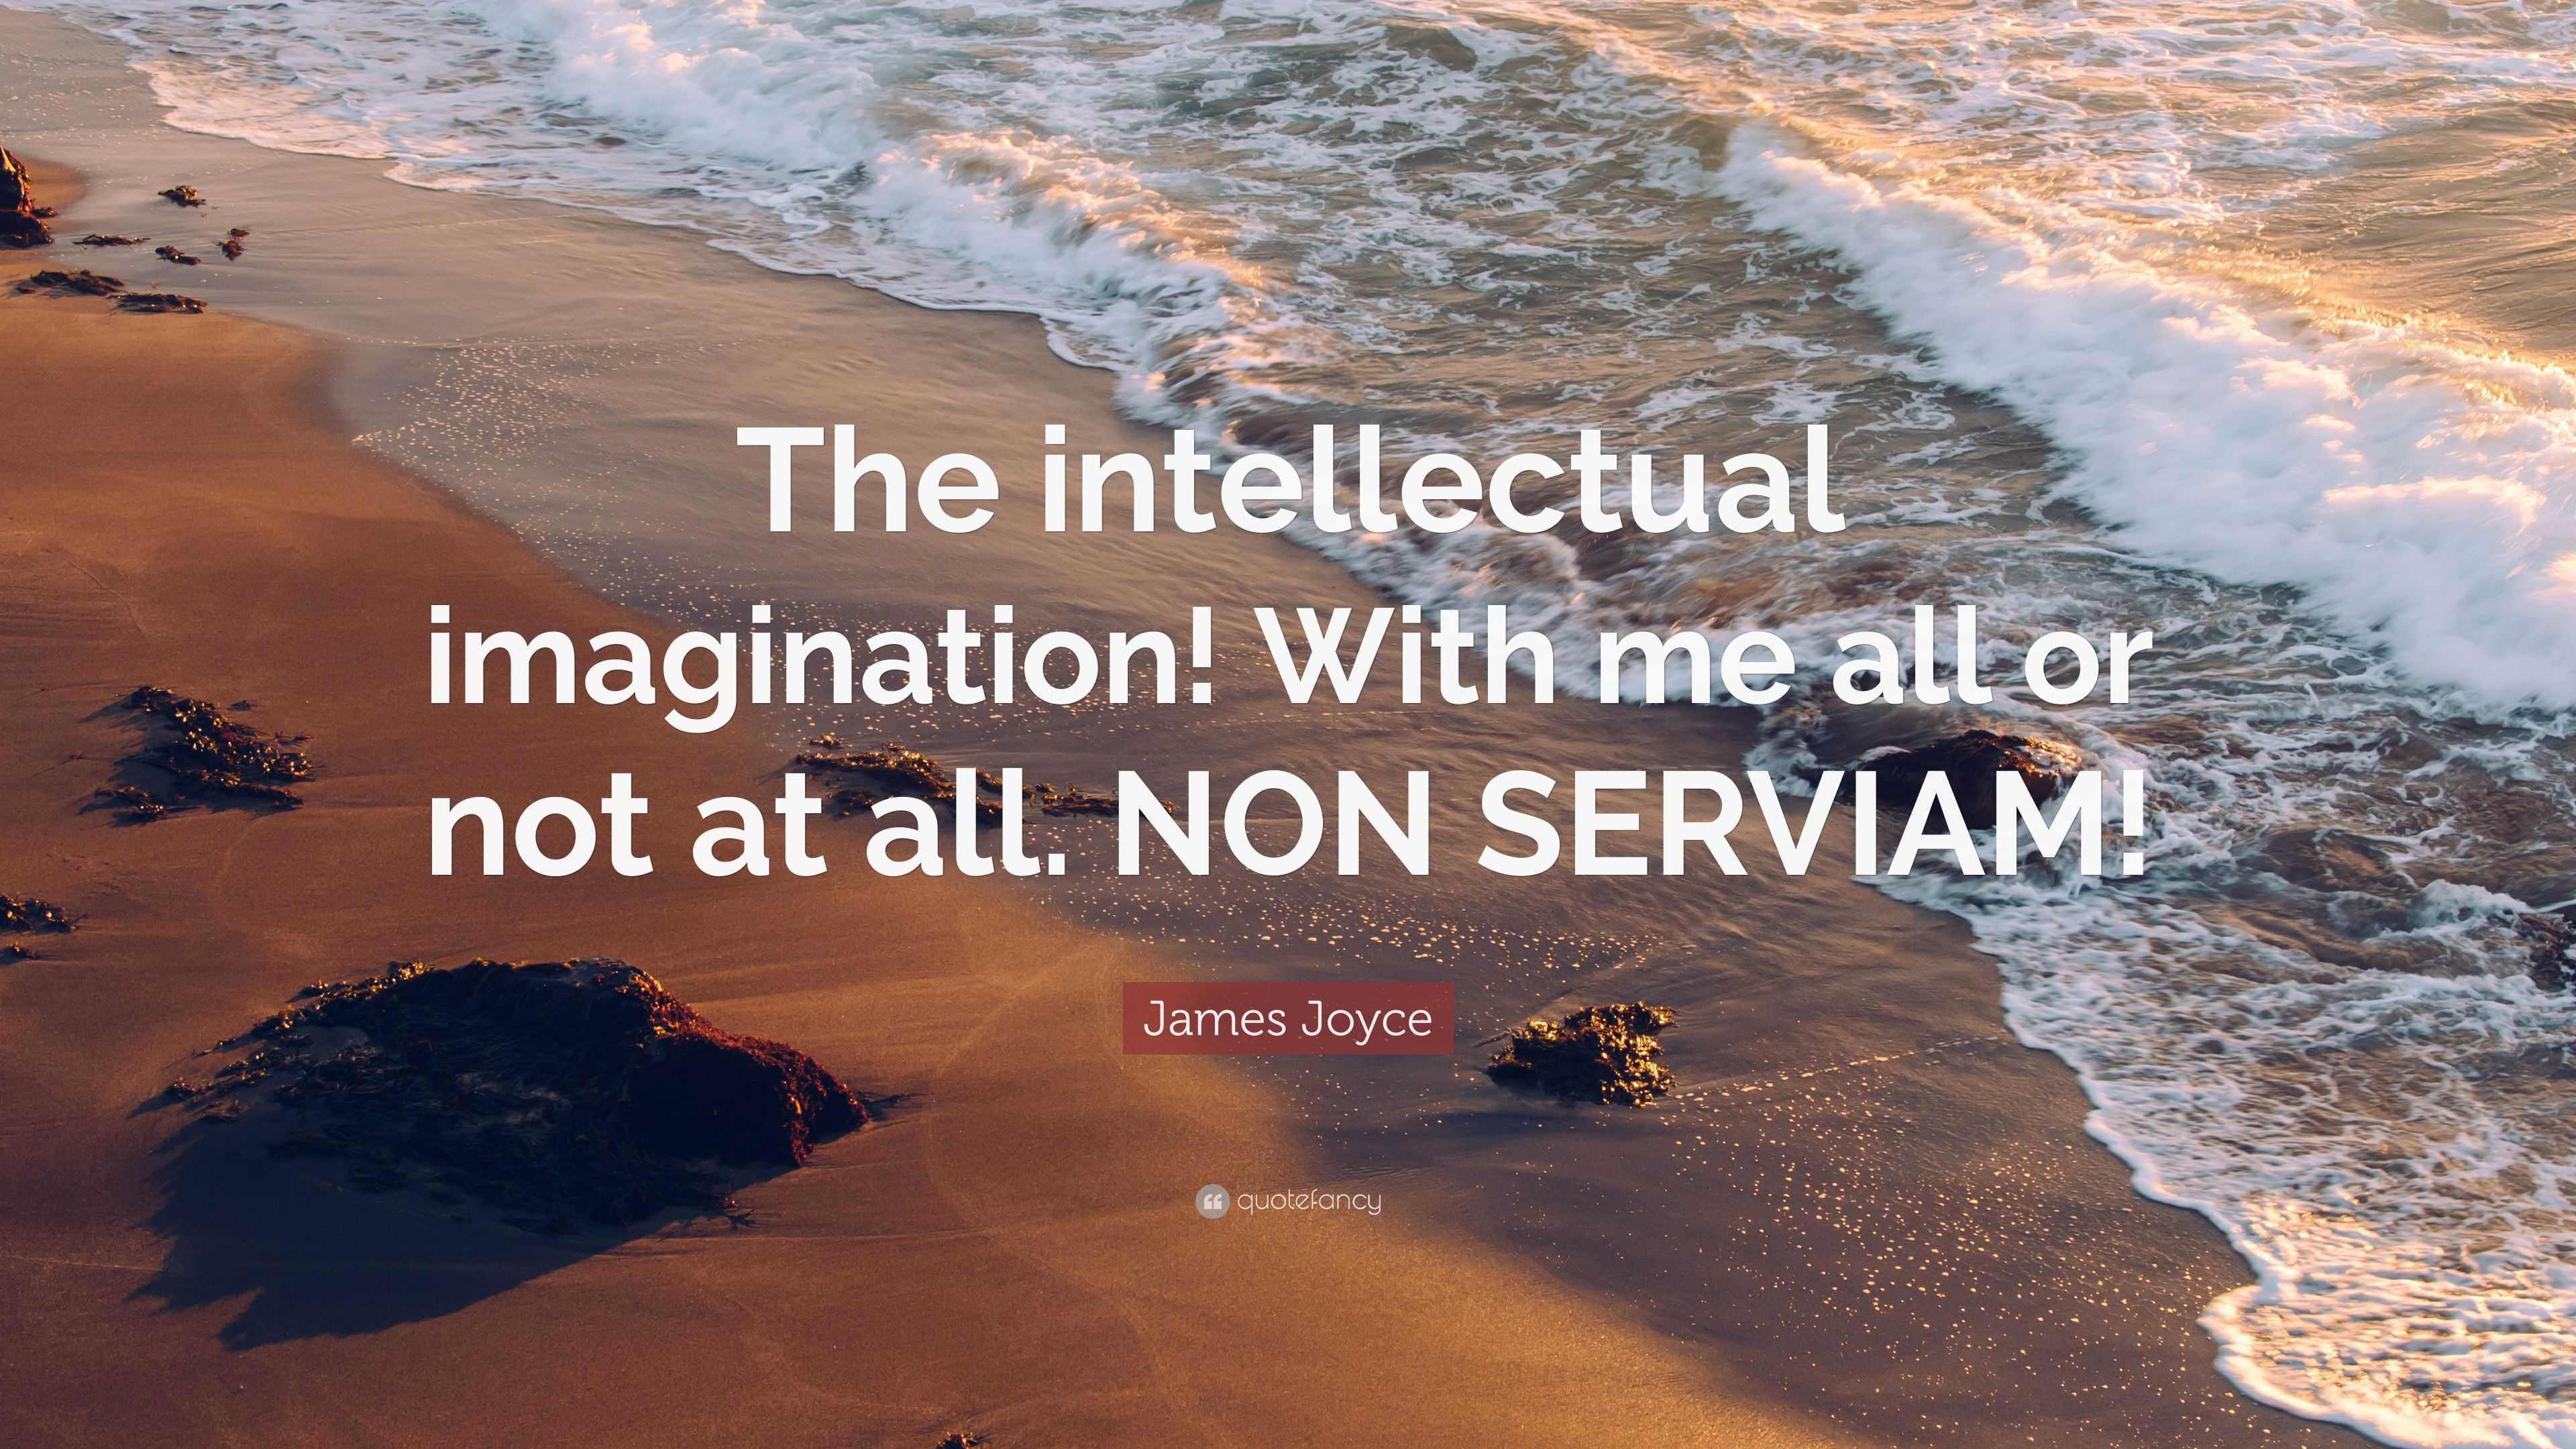 James Joyce Quote: "The intellectual imagination! With me ...